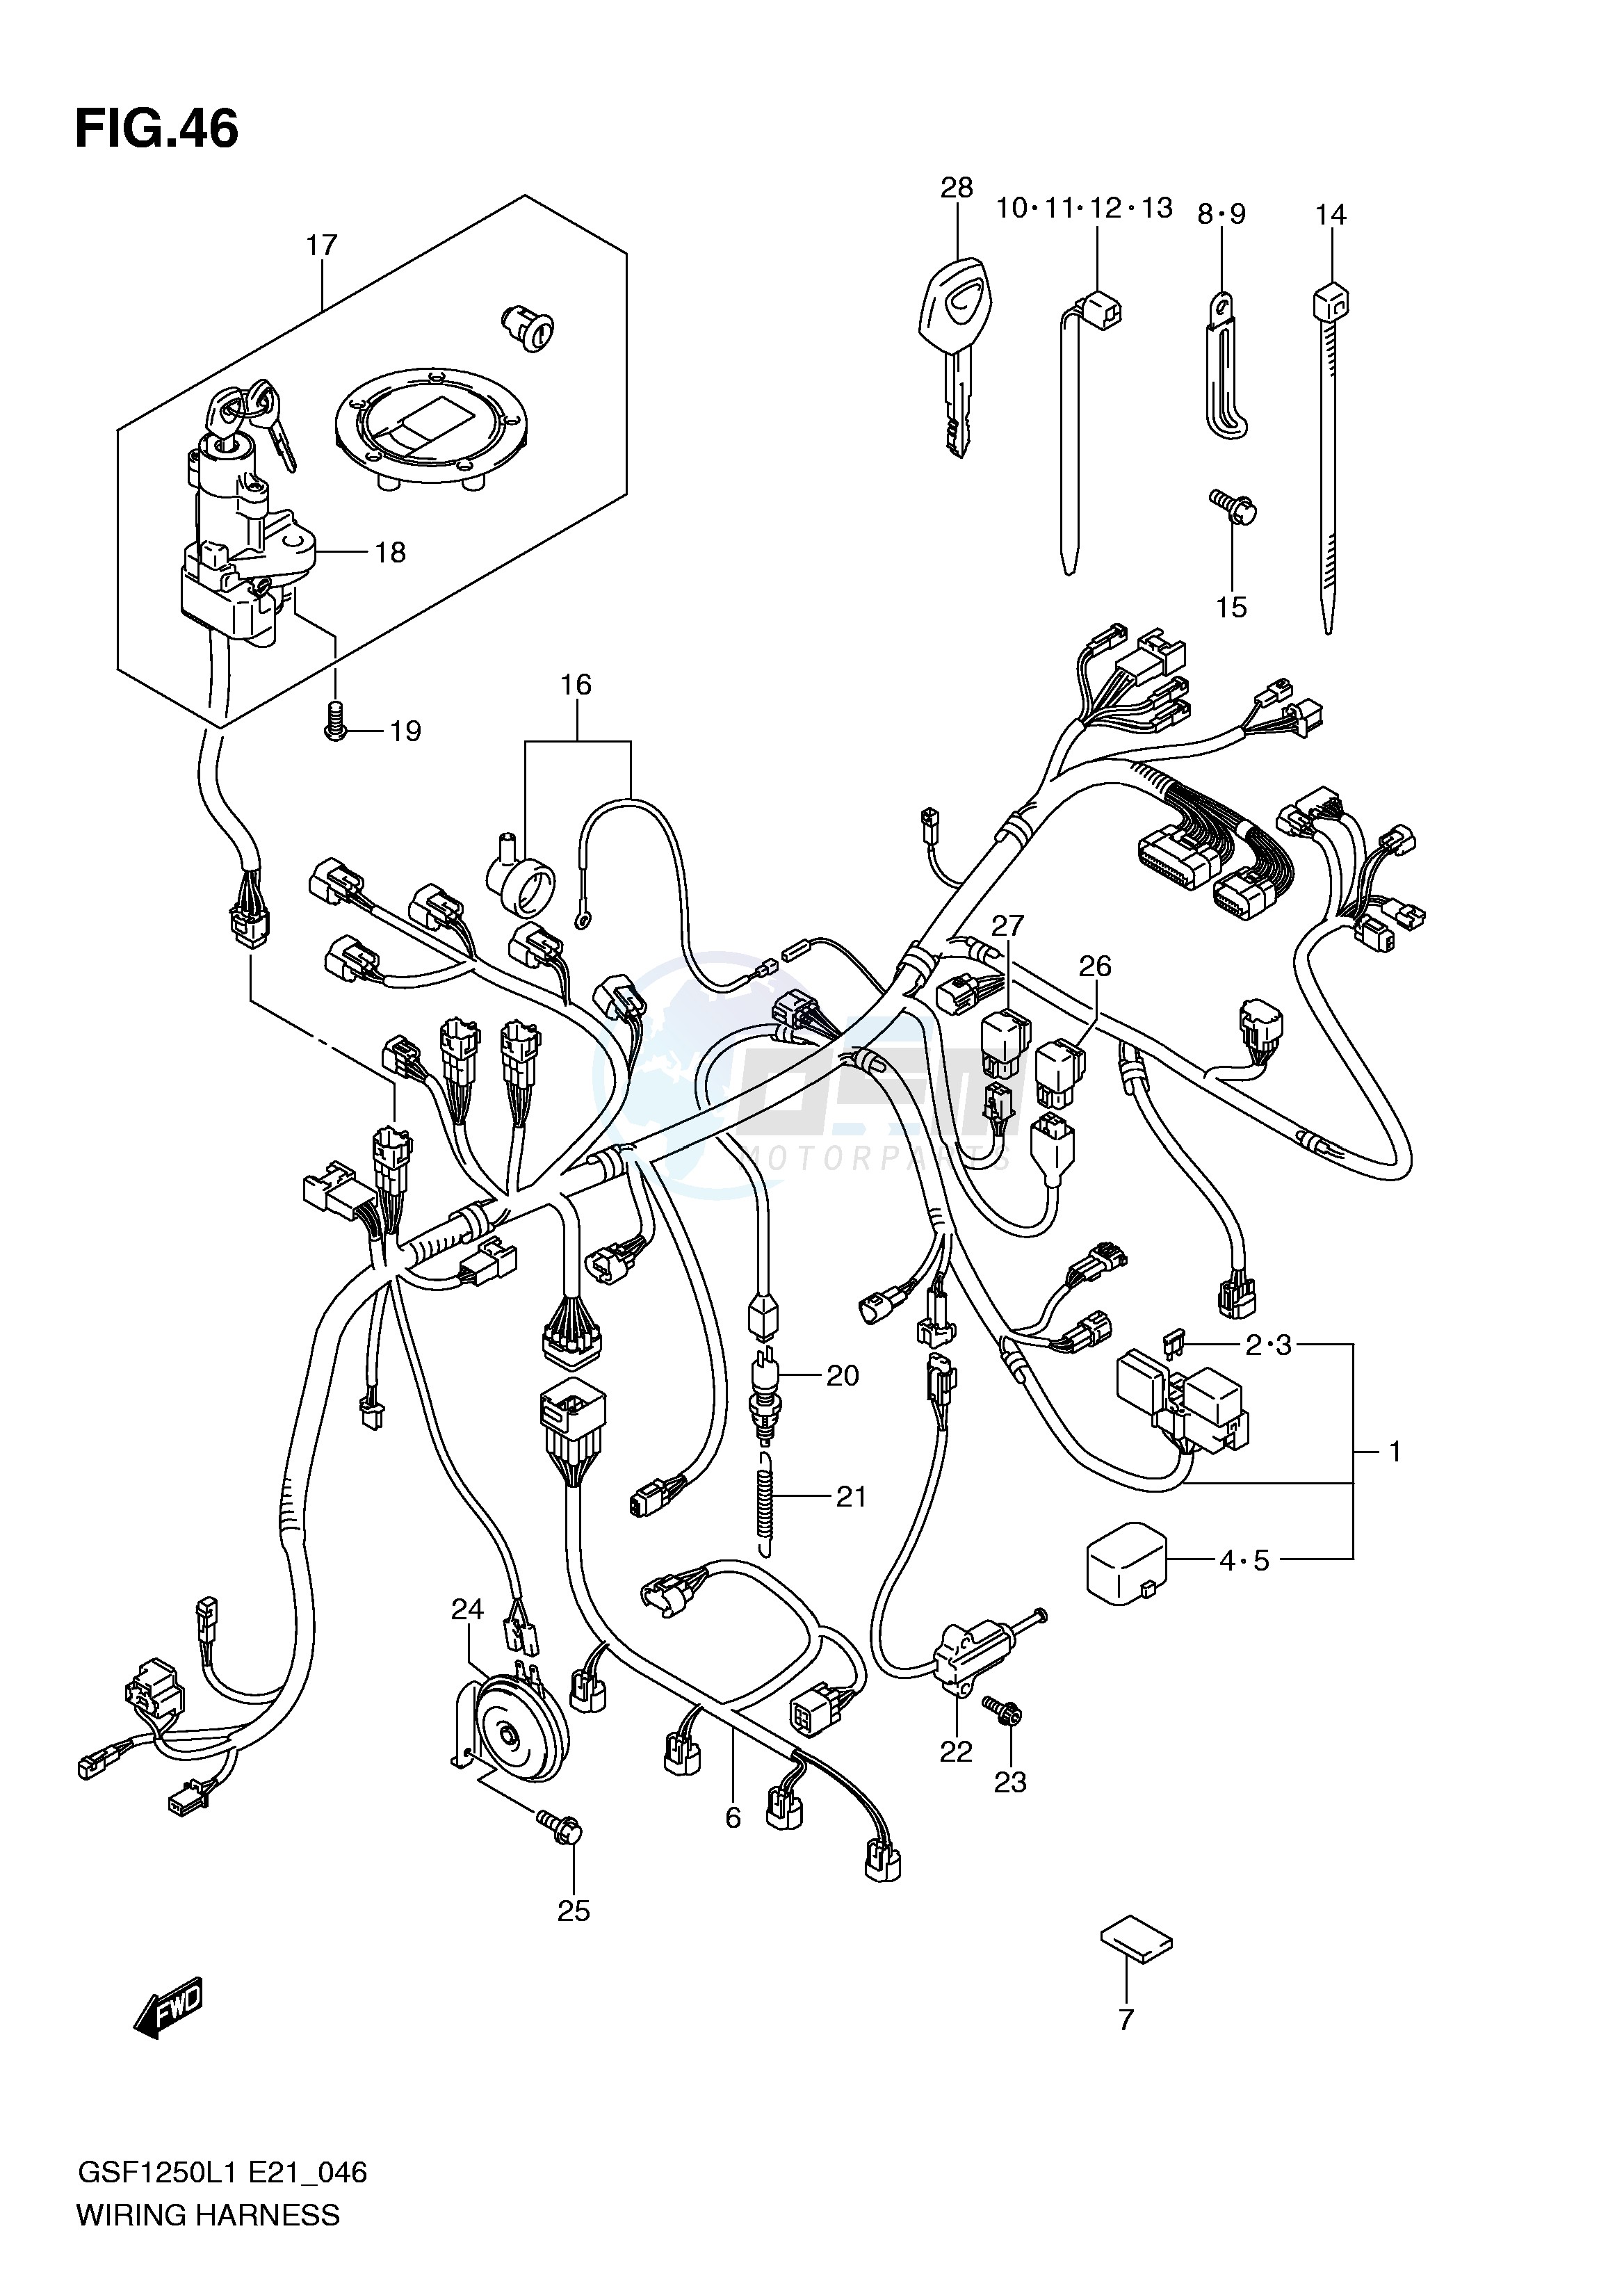 WIRING HARNESS (GSF1250L1 E21) image